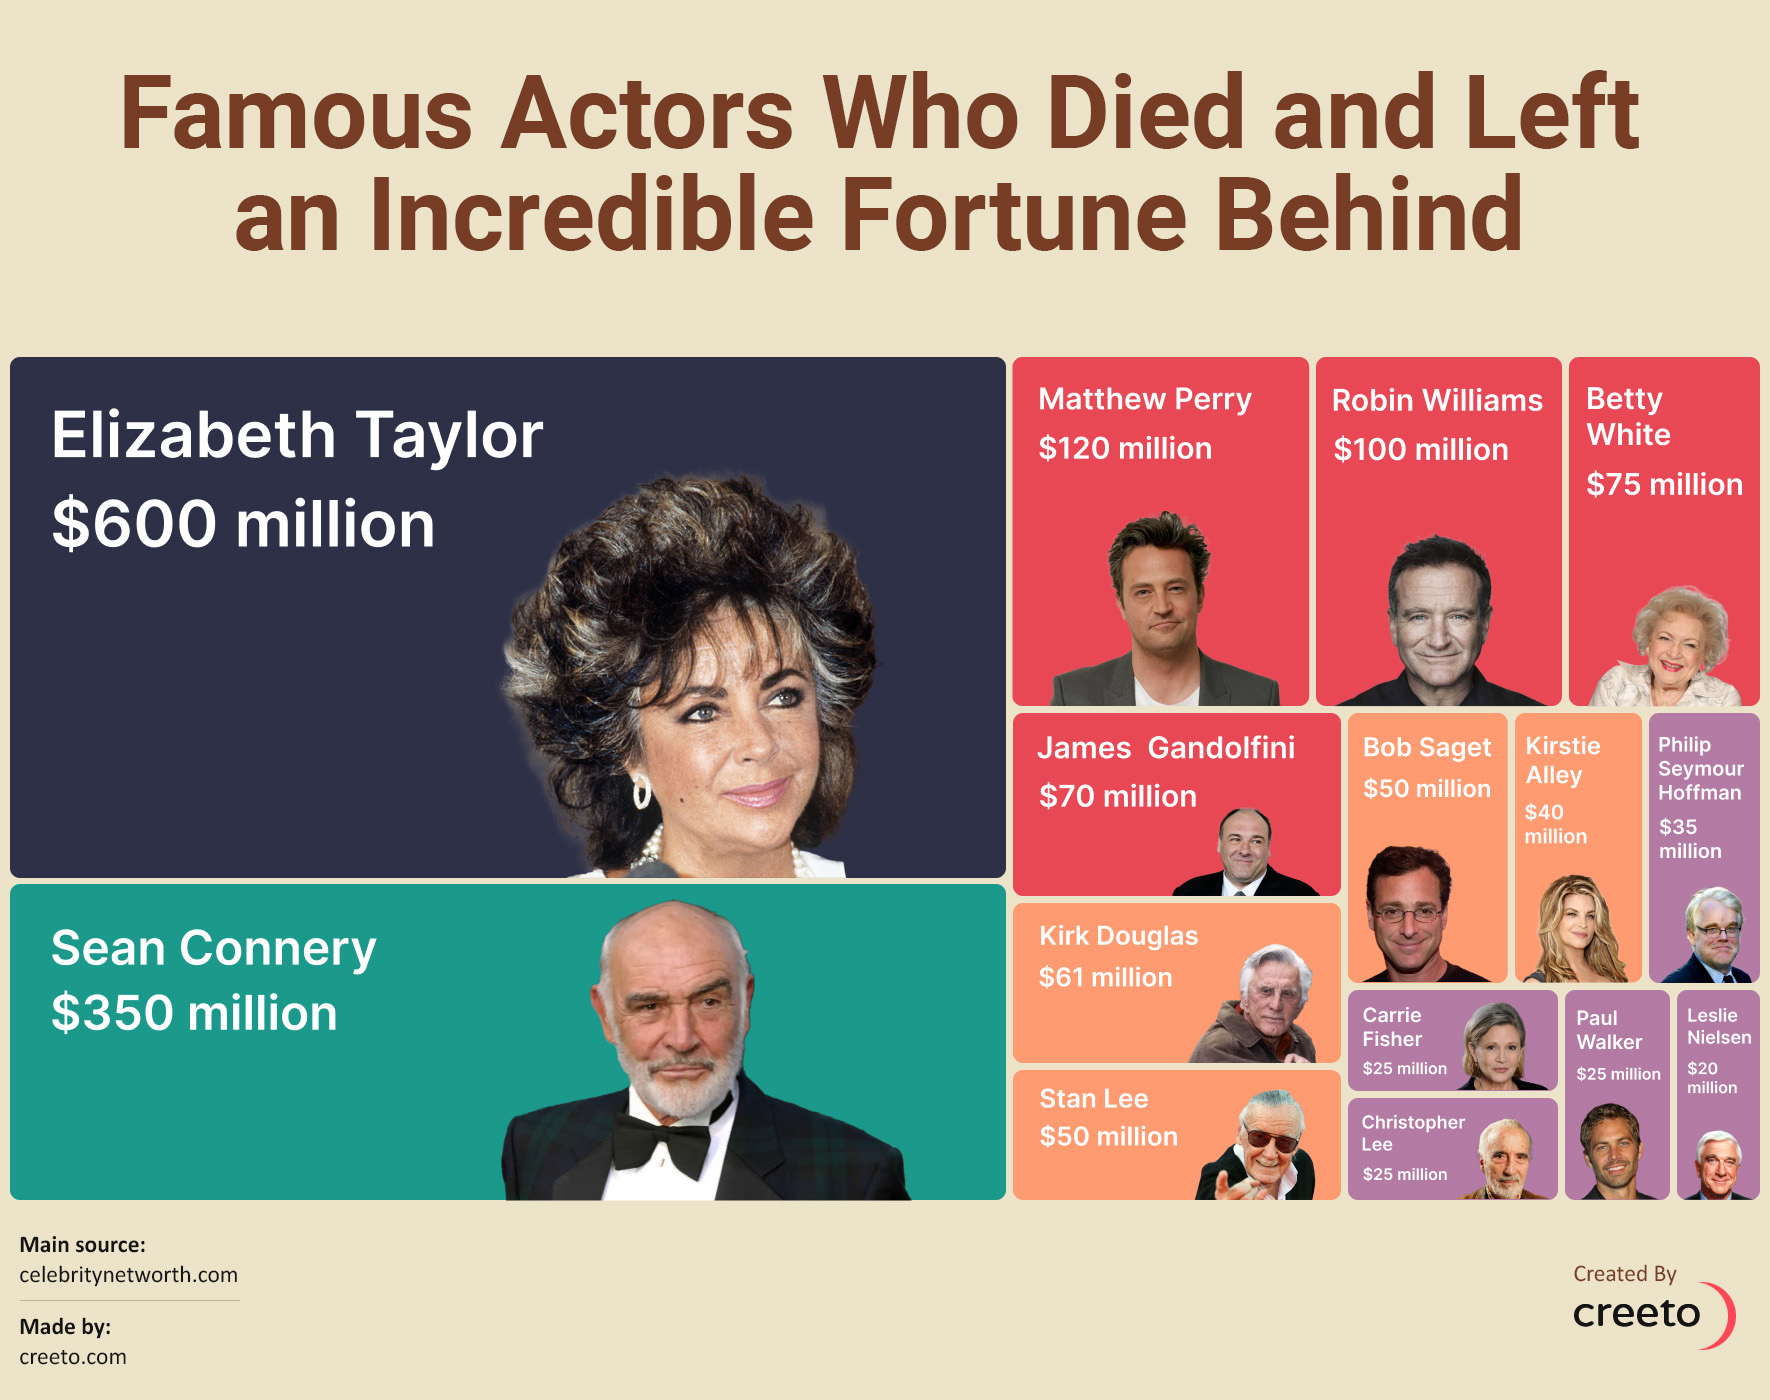 Famous Actors Who Died and Left an Incredible Fortune Behind